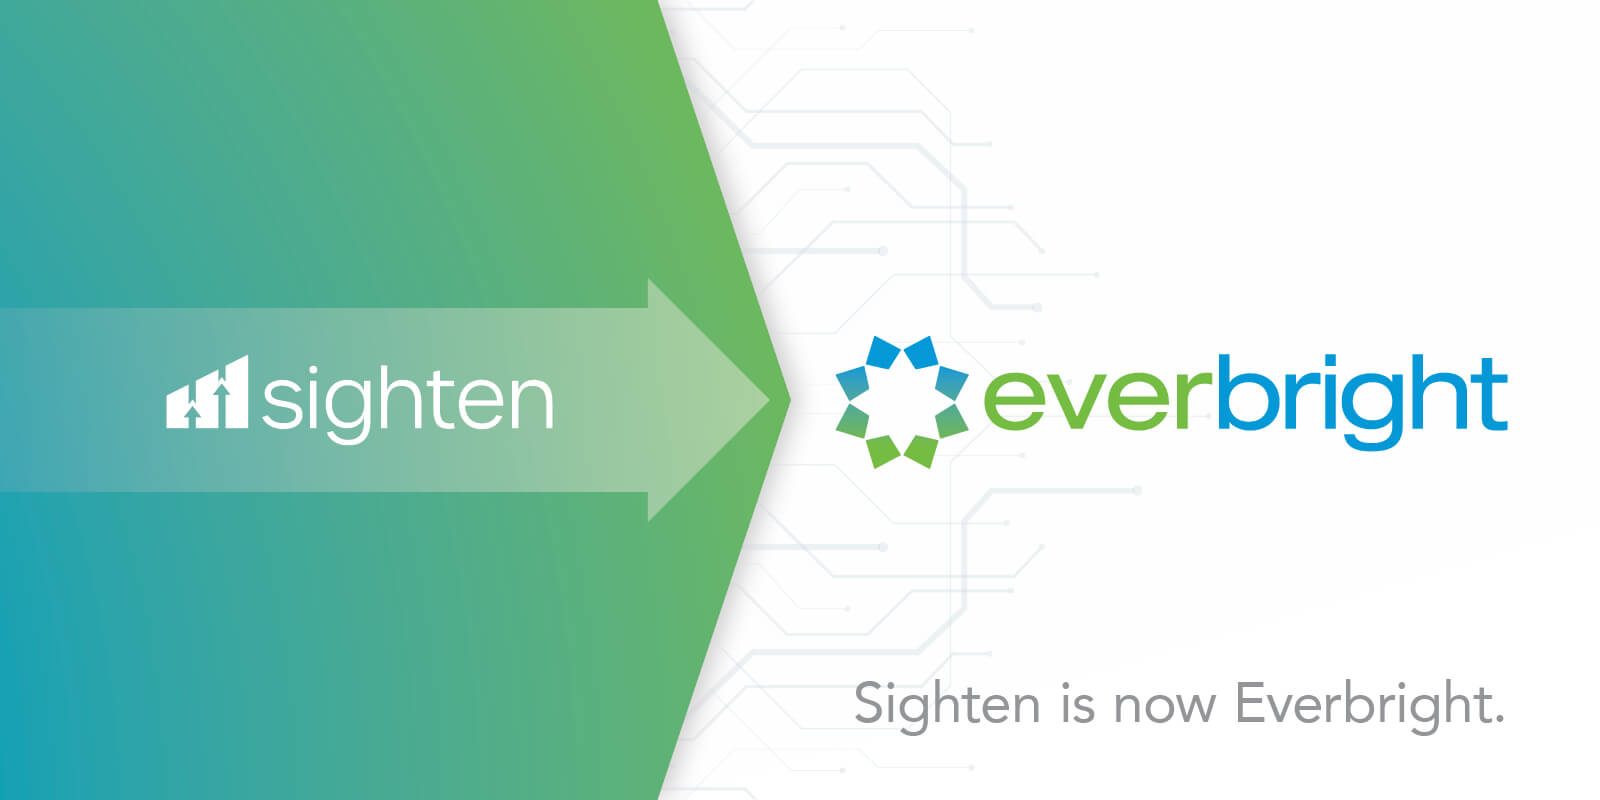 Sighten merges with EverBright